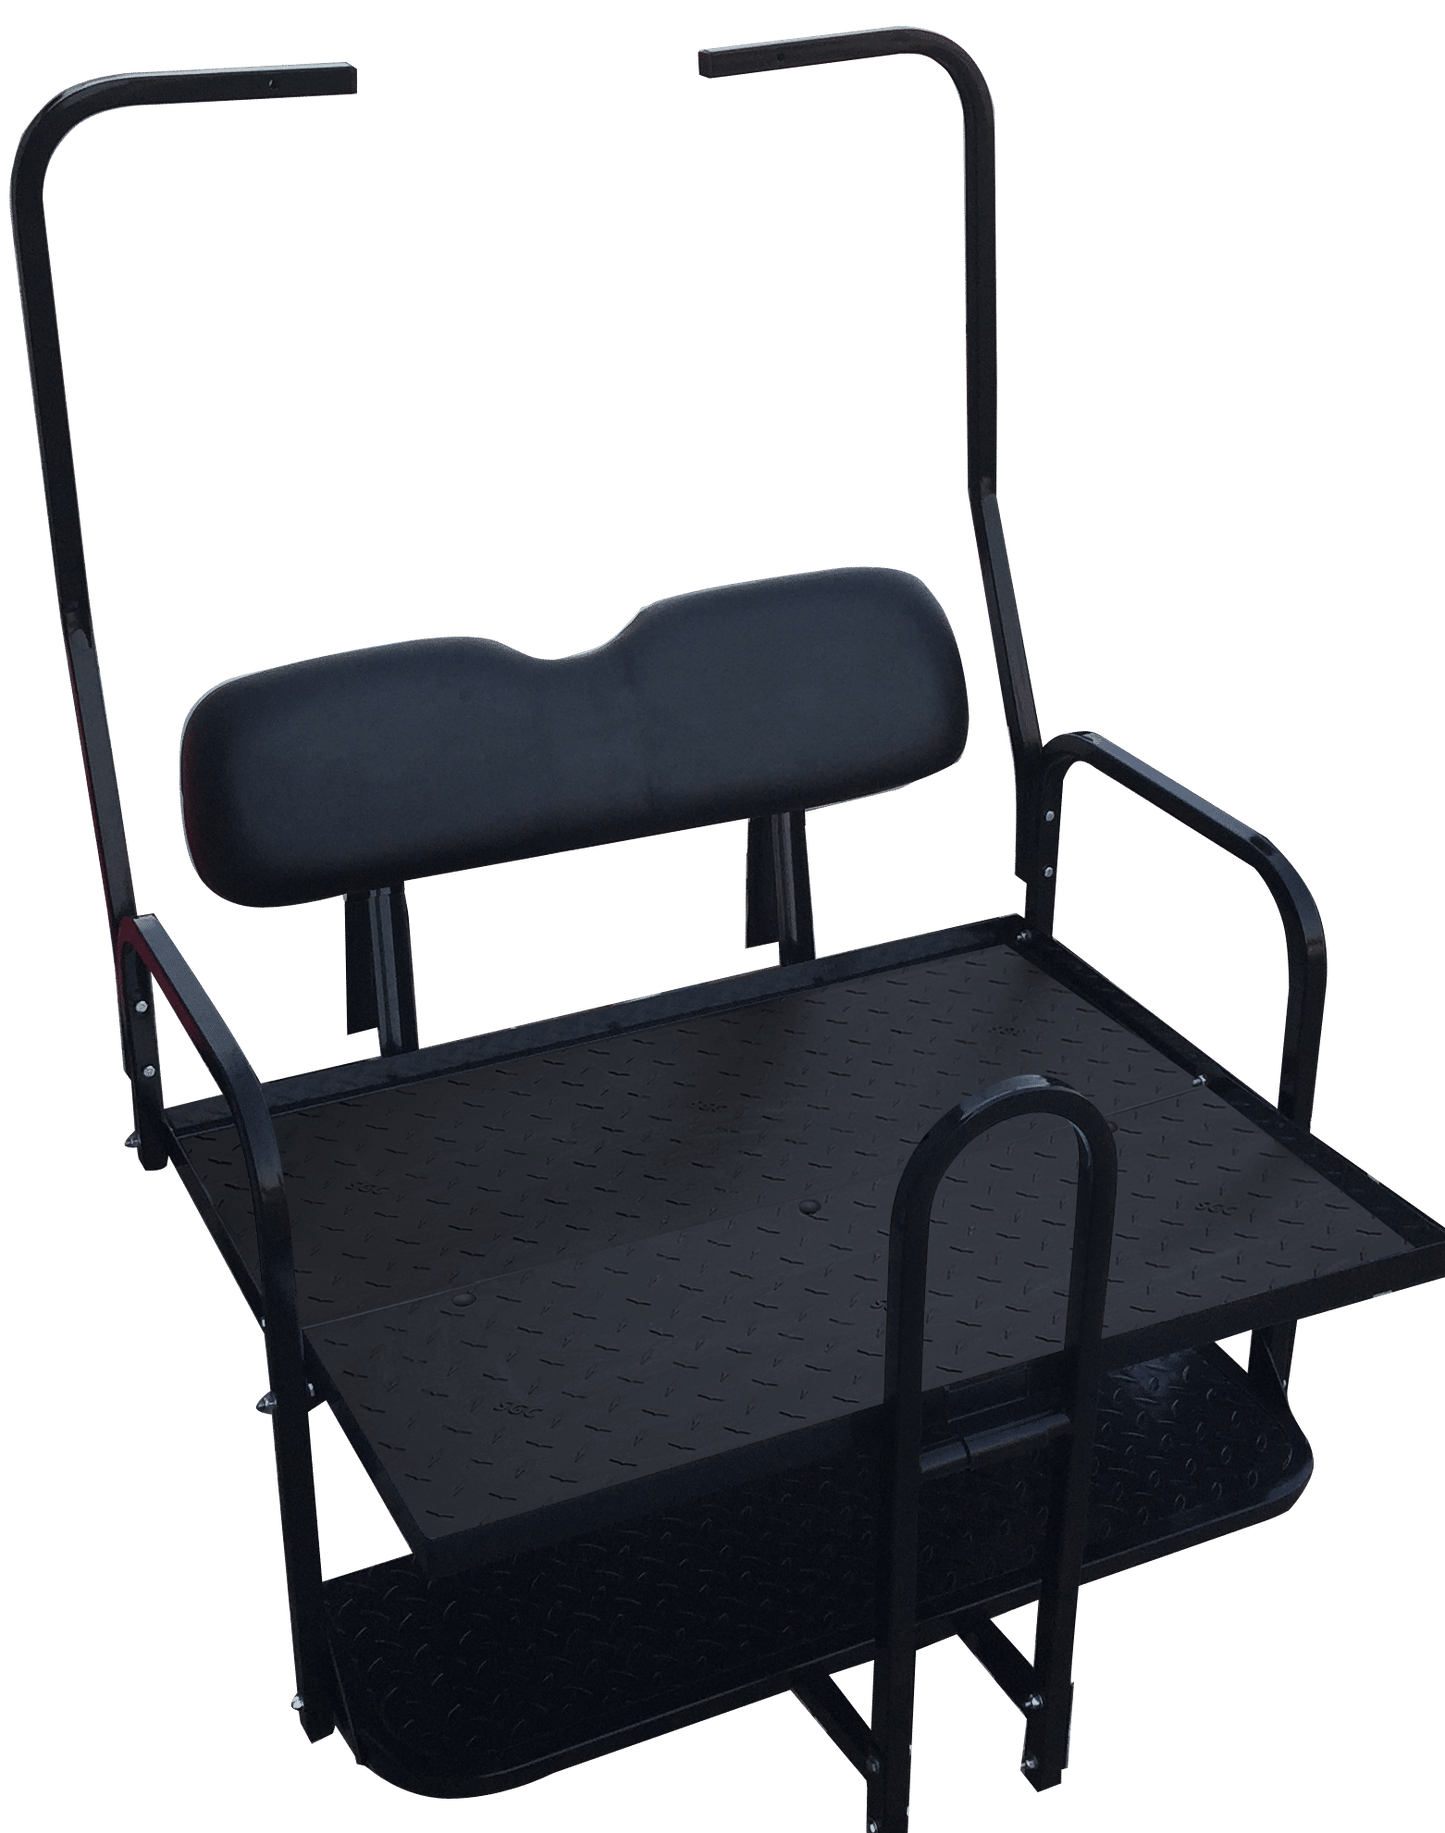 SFDS08 – NOMAD Rear Flip Seat Frame only for Club Car DS (old style roof supports included in box) (1982-2000.5)